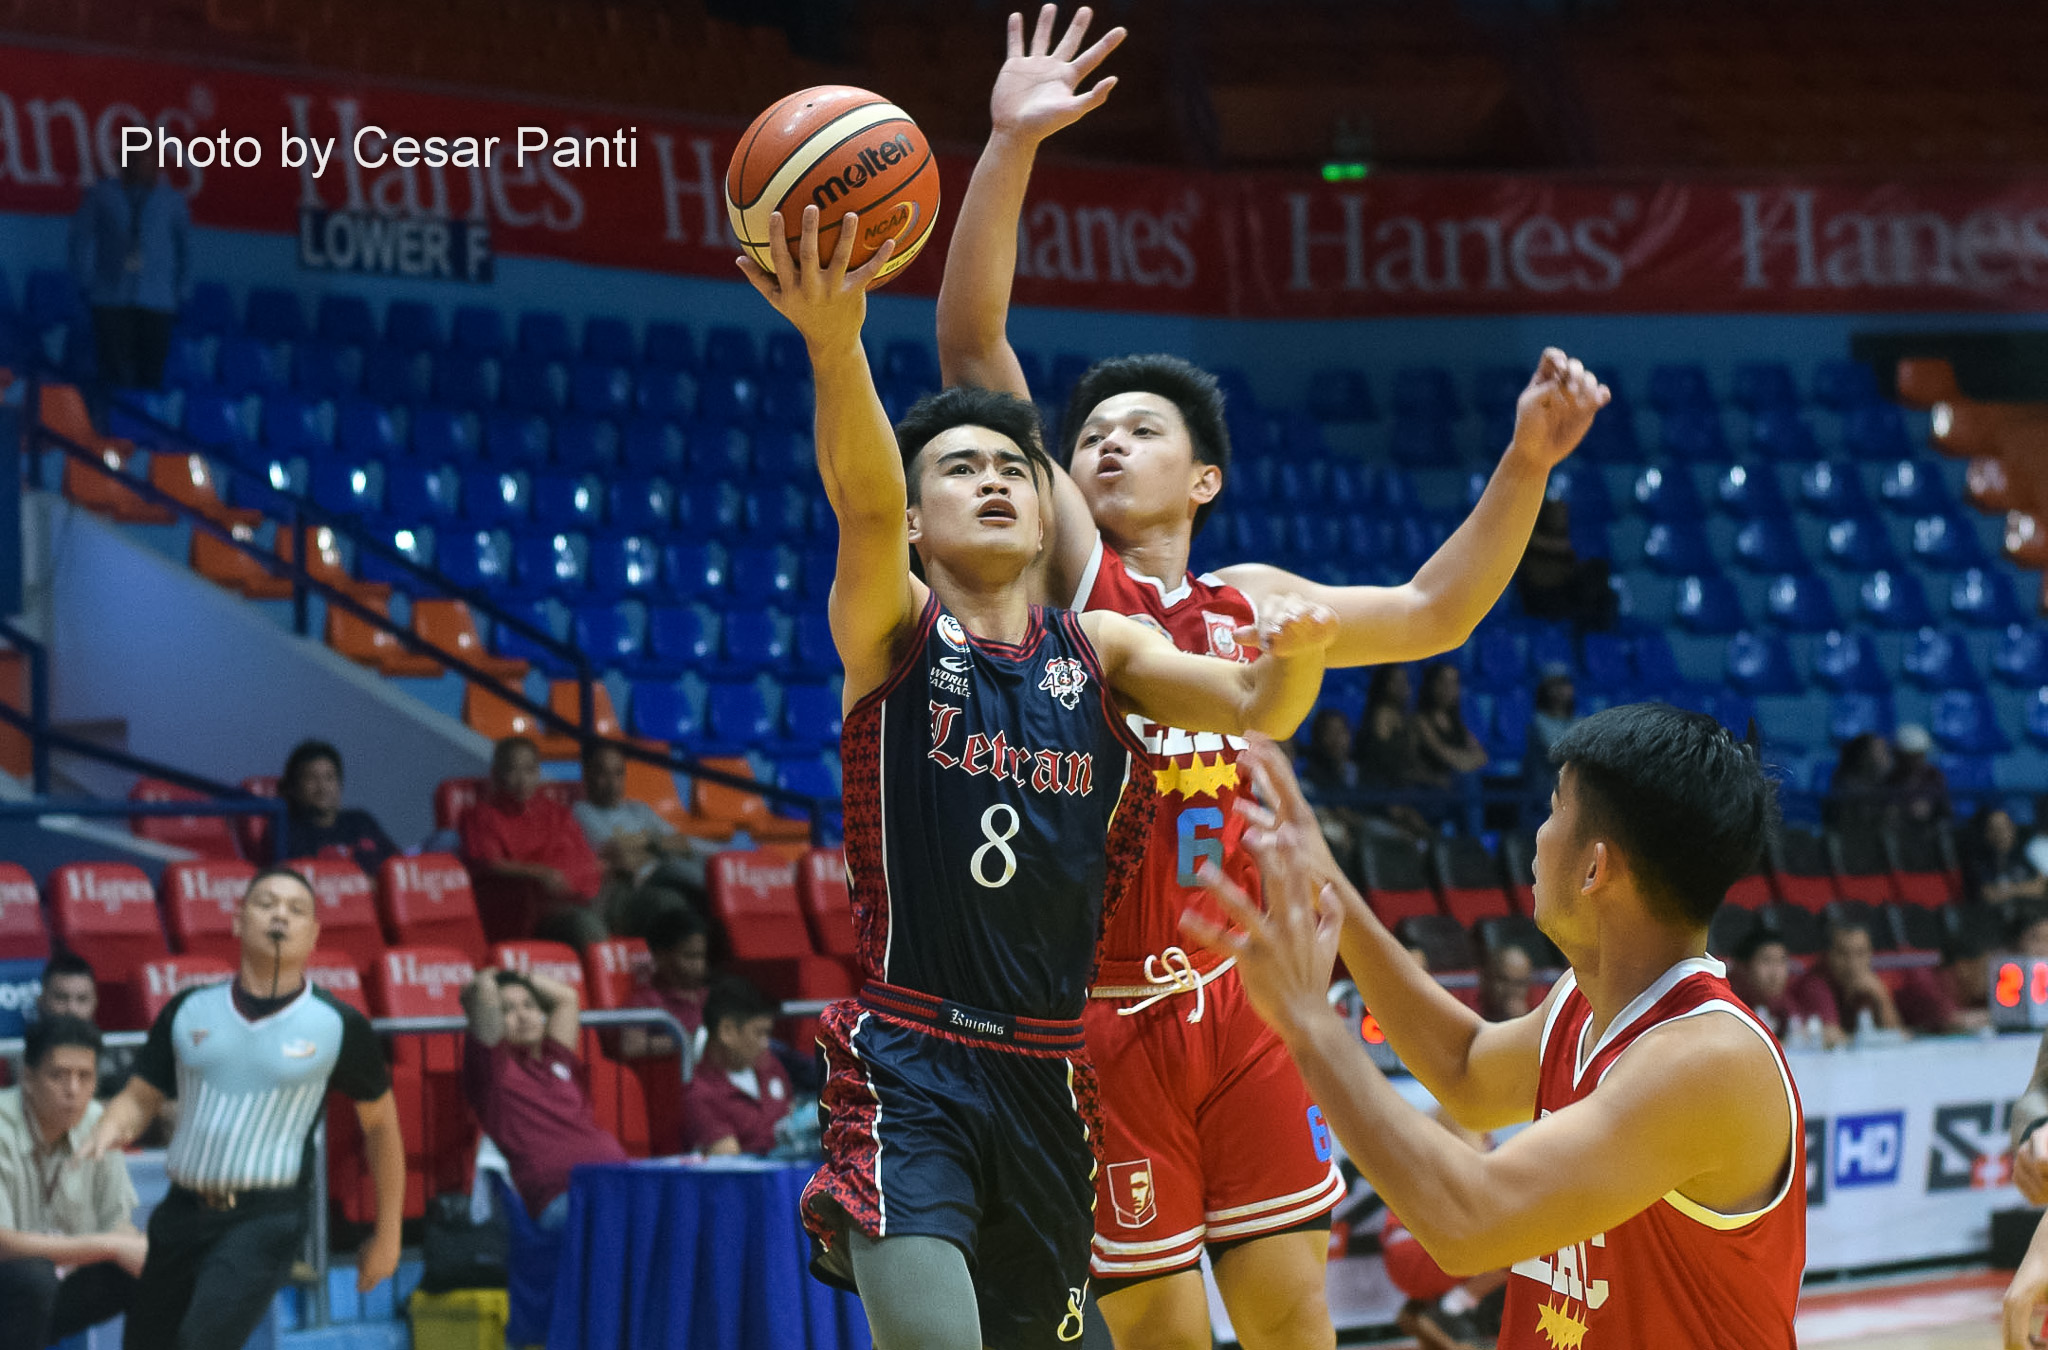 Letran outmuscles EAC to tie for third place